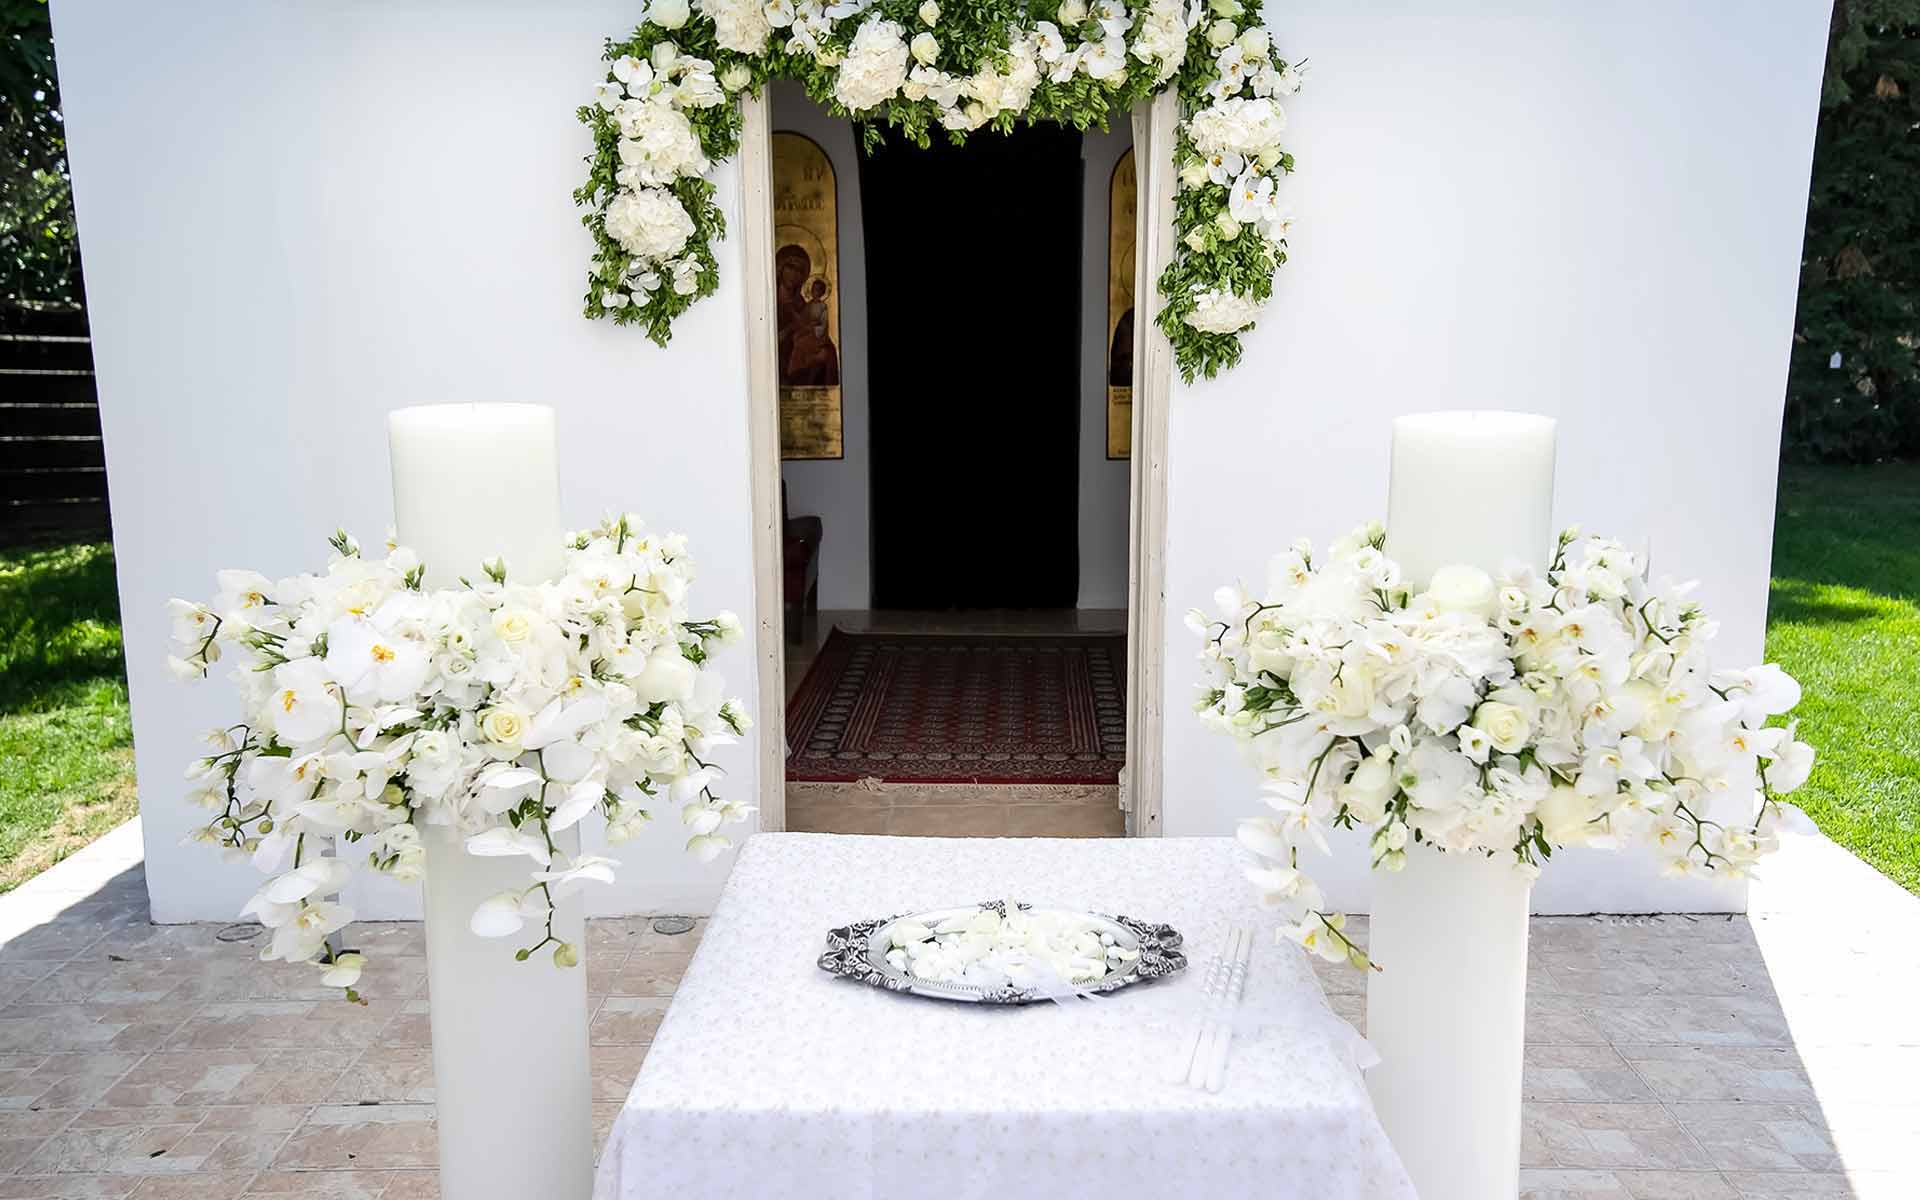 Unity-candle-set-with-Orchids,-hydrangeas-and-roses-all-in-white-for-an-Orthodox-ceremony